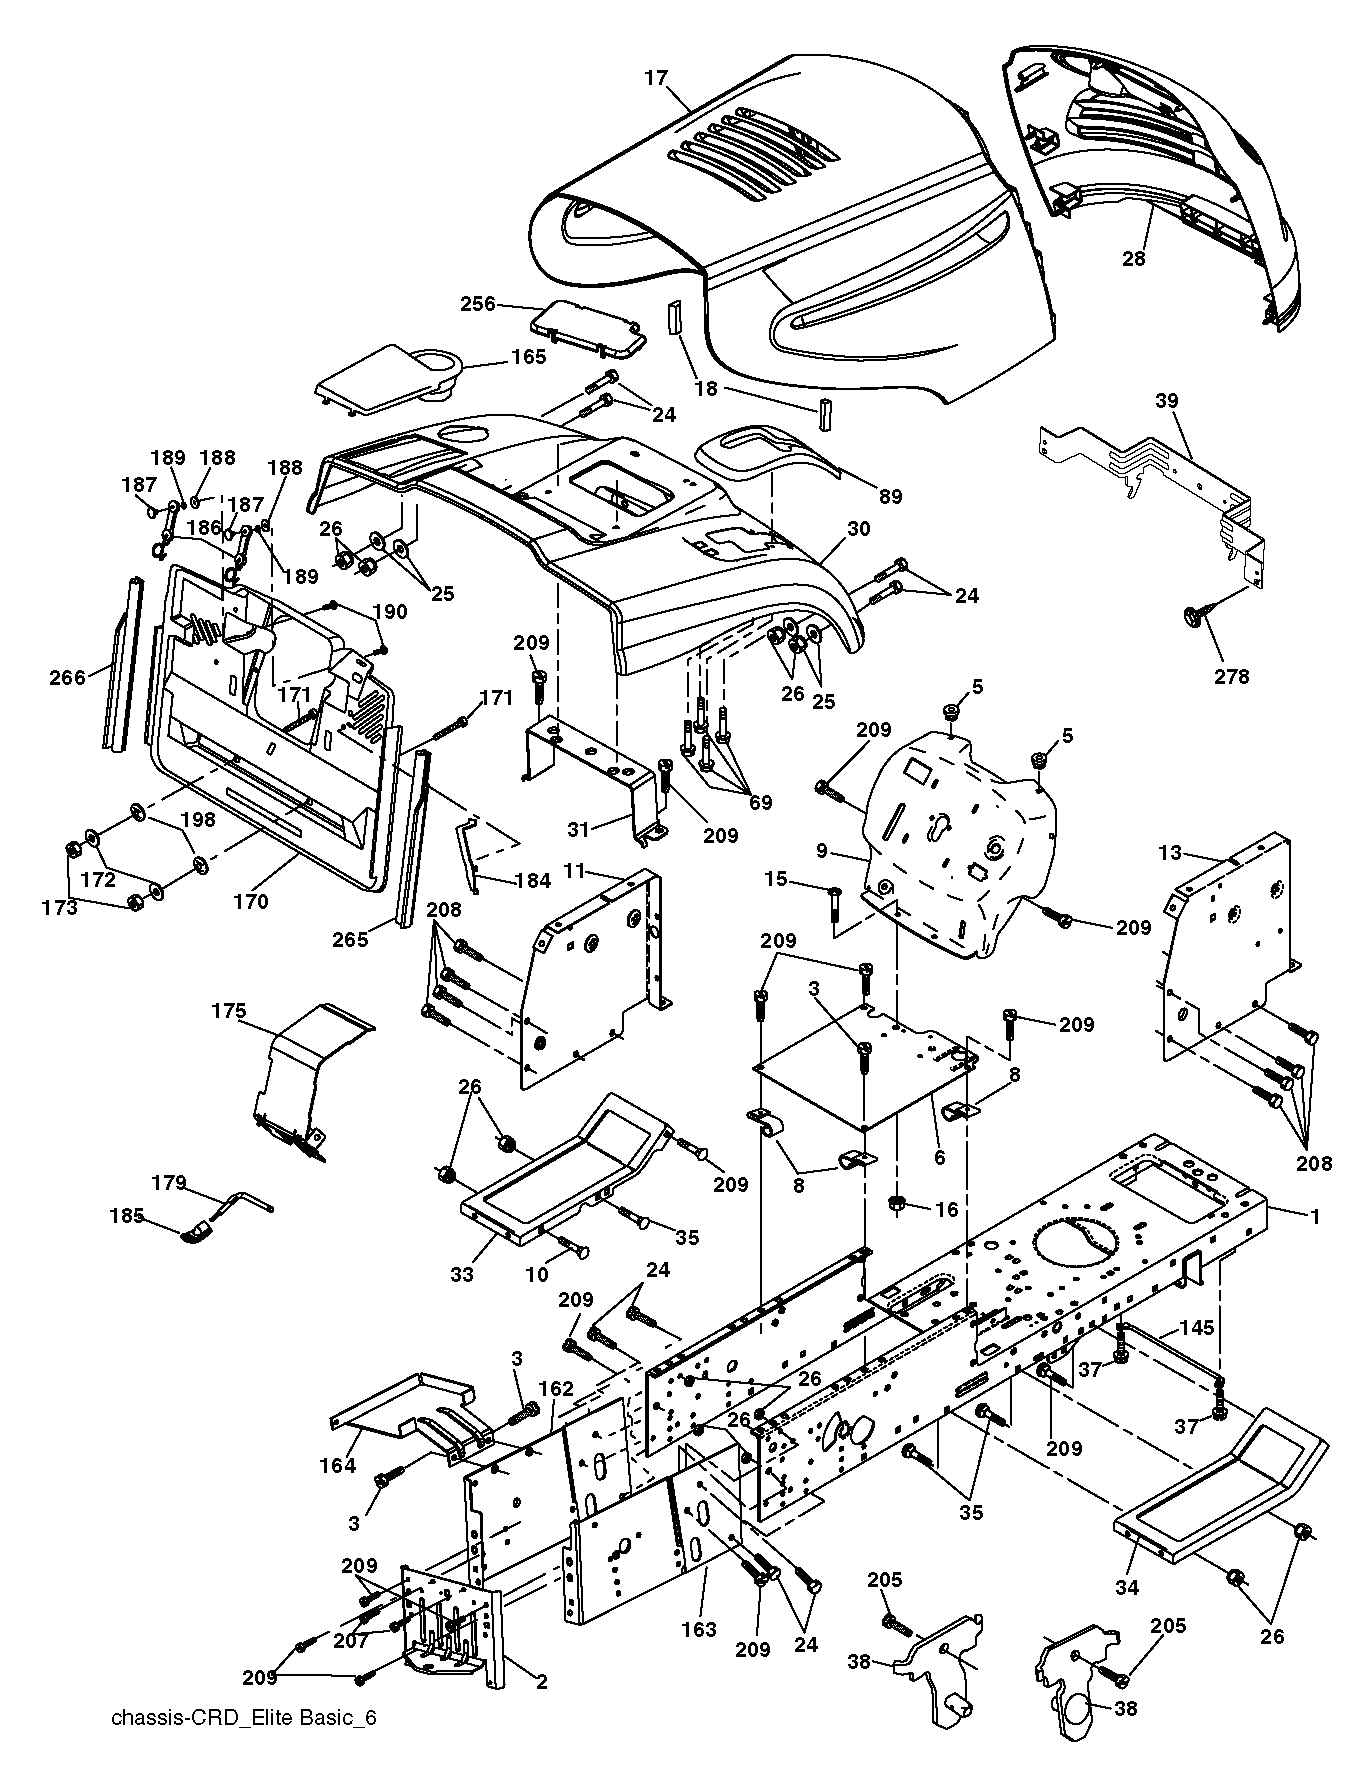 Chassis and appendix 532174620, 583101001, 817060612, 532155272, 583133601, 532126471, 532193518, 872140608, 532174996, 532186946, 874180512, 596040501, 532190085, 532184921, 596564401, 734117201, 596322601, 532186707, 532403700, 532165156, 532185545, 532185546, 596136001, 596030701, 583117401, 532407807, 532142432, 532197527, 532409167, 532180382, 583100901, 532165605, 532181356, 586730701, 596337801, 734117441, 873510600, 583707801, 583100601, 532174662, 532441416, 597000601, 596987401, 819061216, 810071000, 596039001, 532168937, 596564001, 817670508, 817670608, 817000612, 532181360, 583146701, 583146601, 596321701, 532005479, 532193935